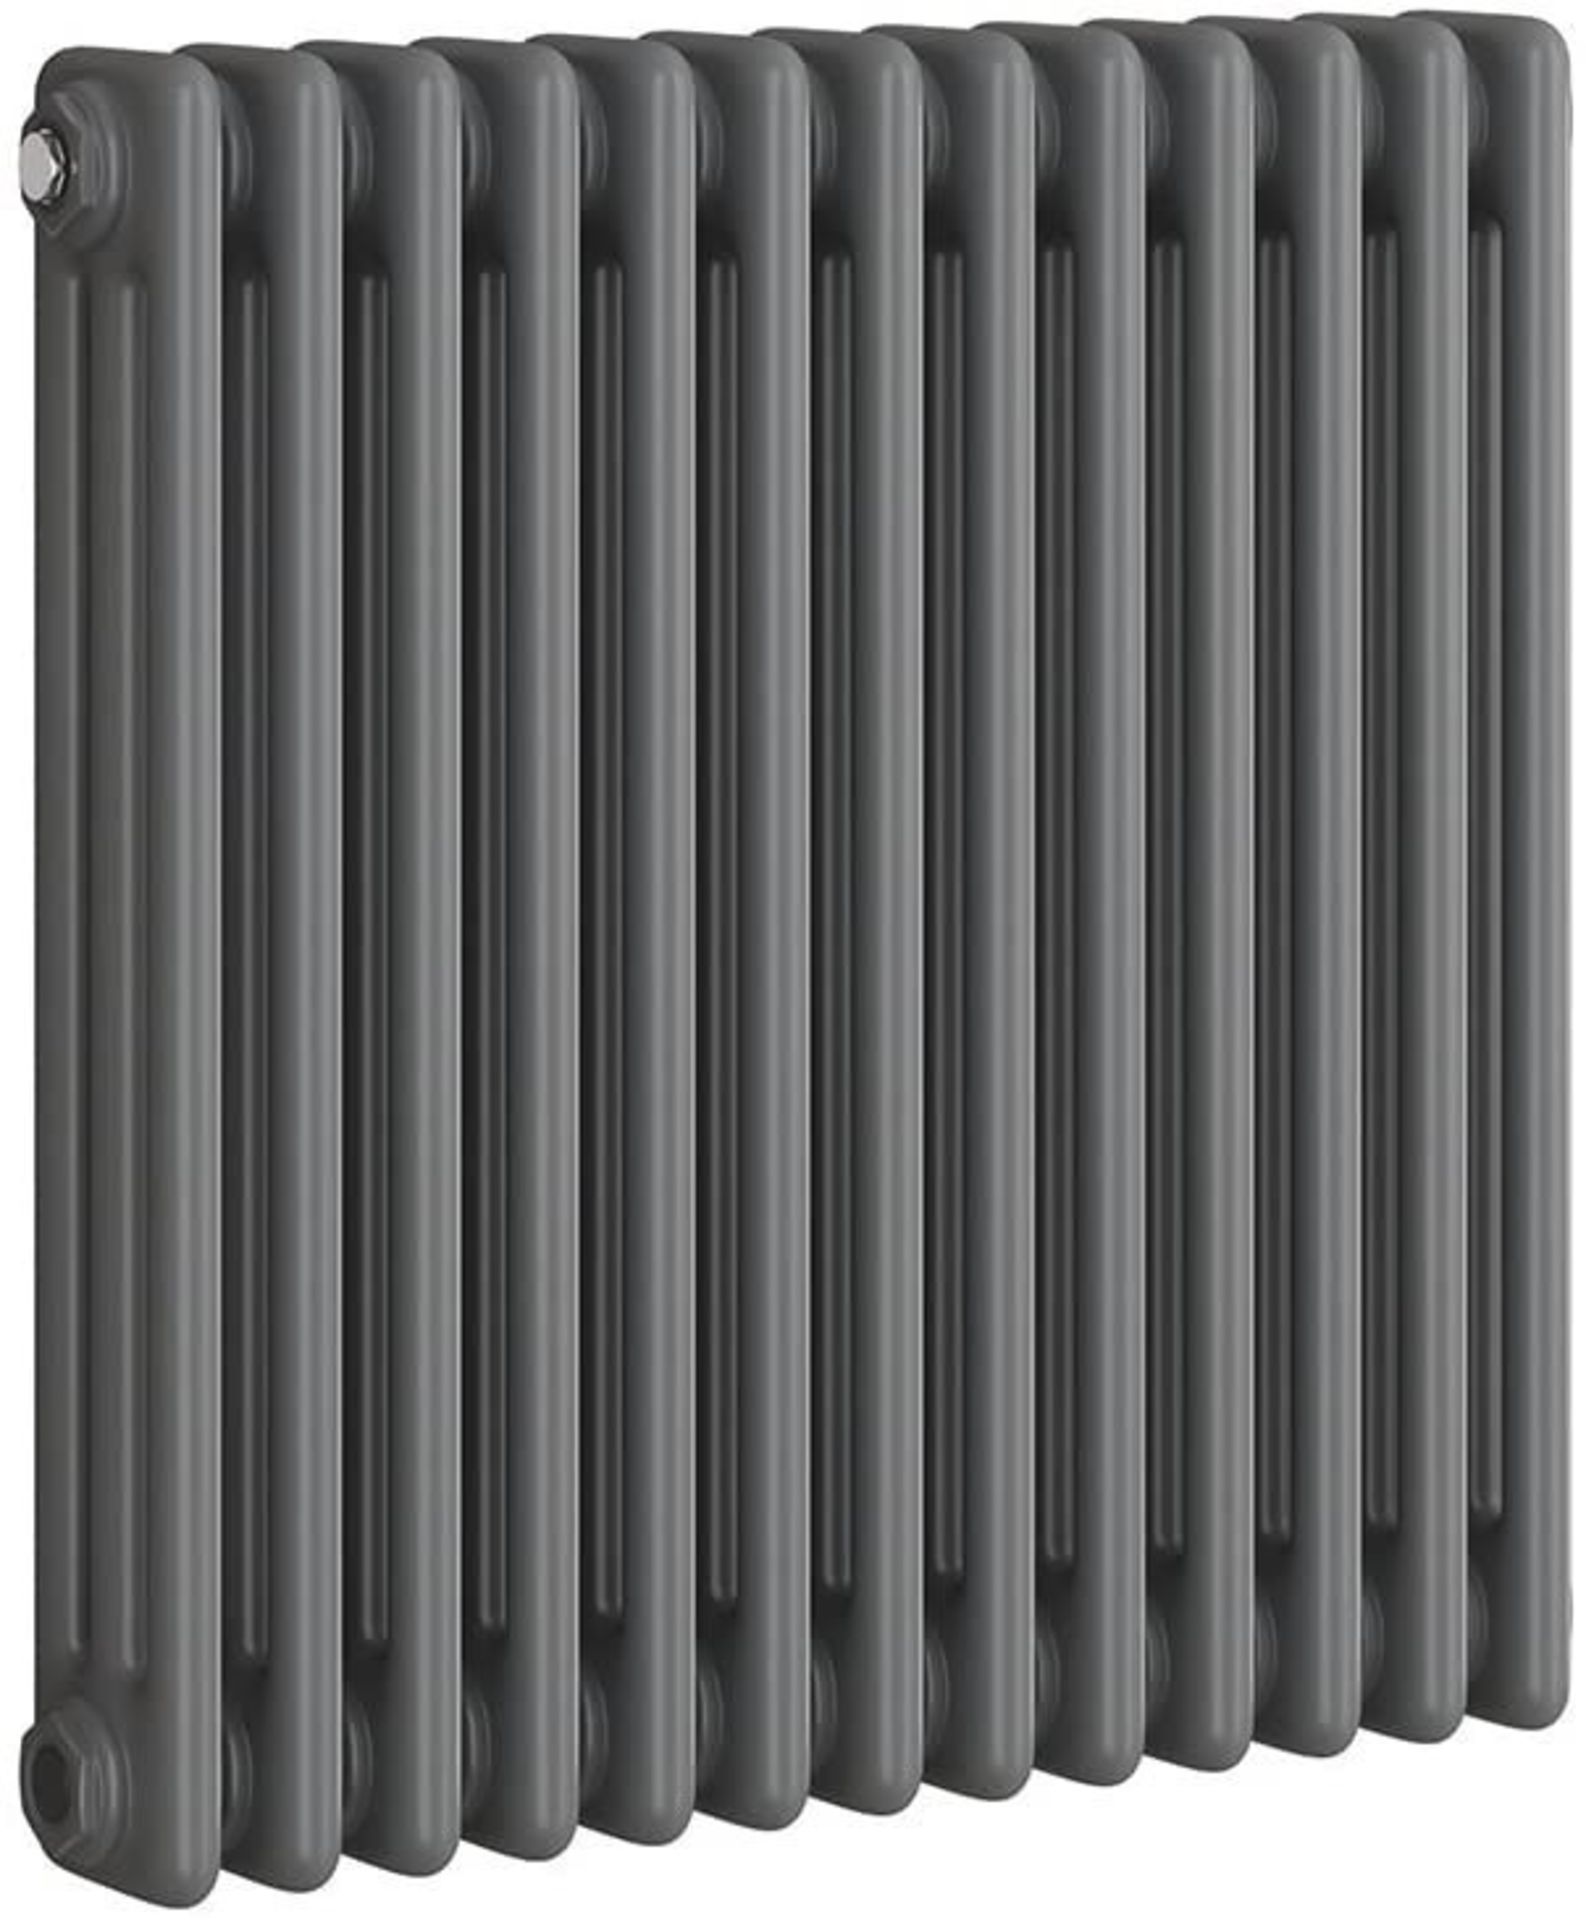 Brand New 600x600mm Anthracite Double Panel Horizontal Colosseum Traditional Radiator.RRP £469.99.C. - Image 3 of 3